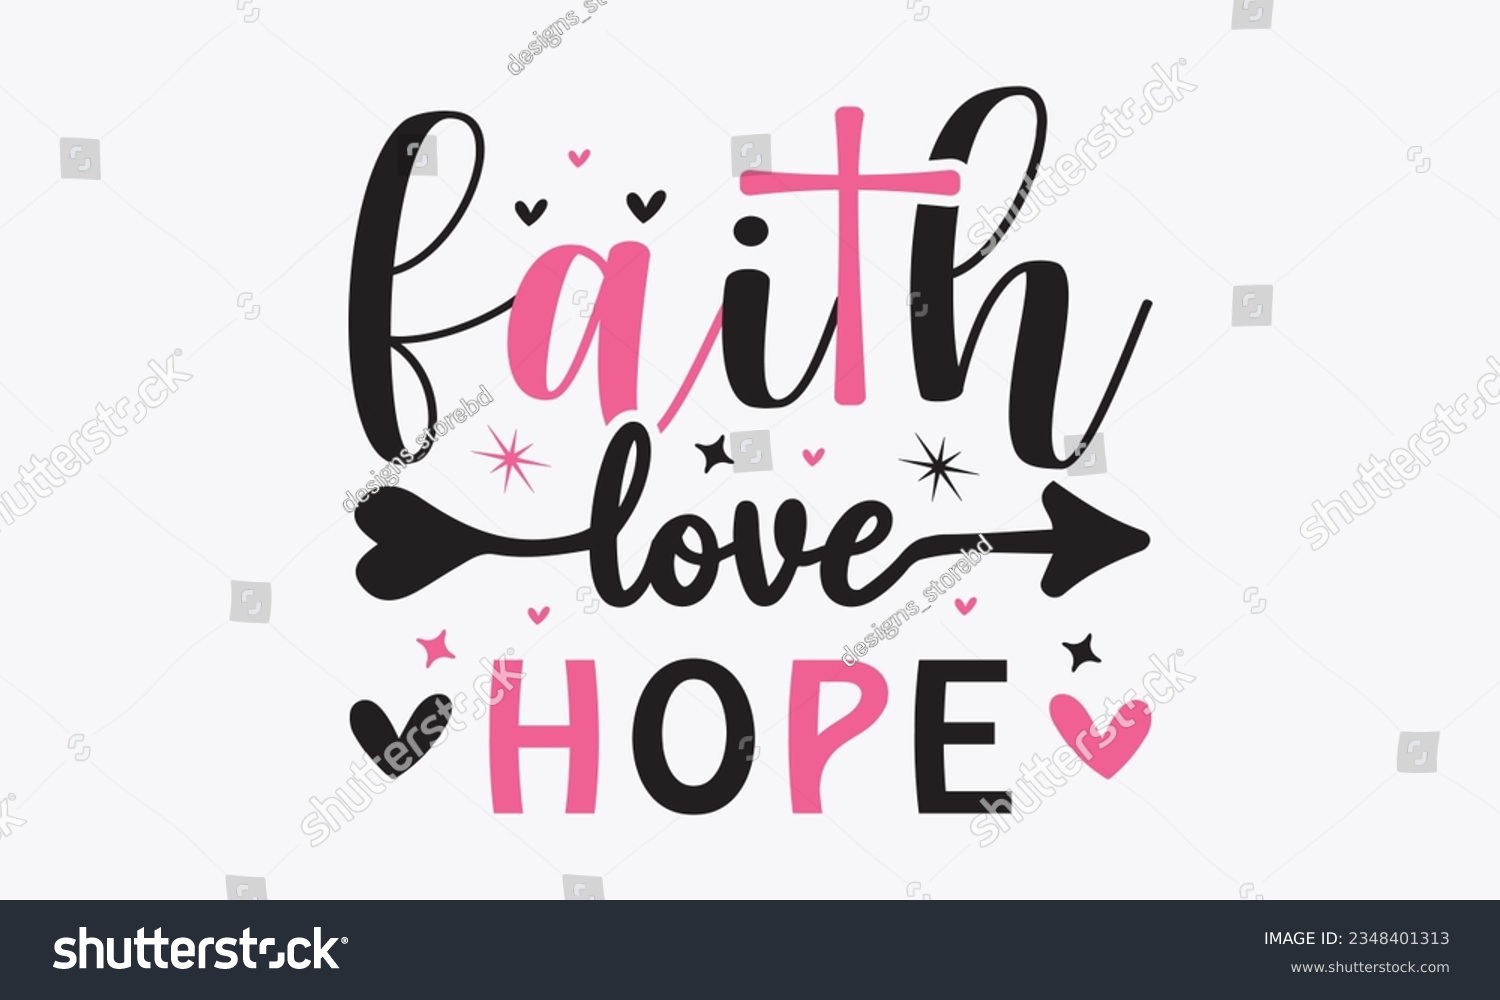 SVG of Faith hope love svg, Breast Cancer SVG design, Cancer Awareness, Instant Download, Breast Cancer Ribbon svg, cut files, Cricut, Silhouette, Breast Cancer t shirt design Quote bundle svg